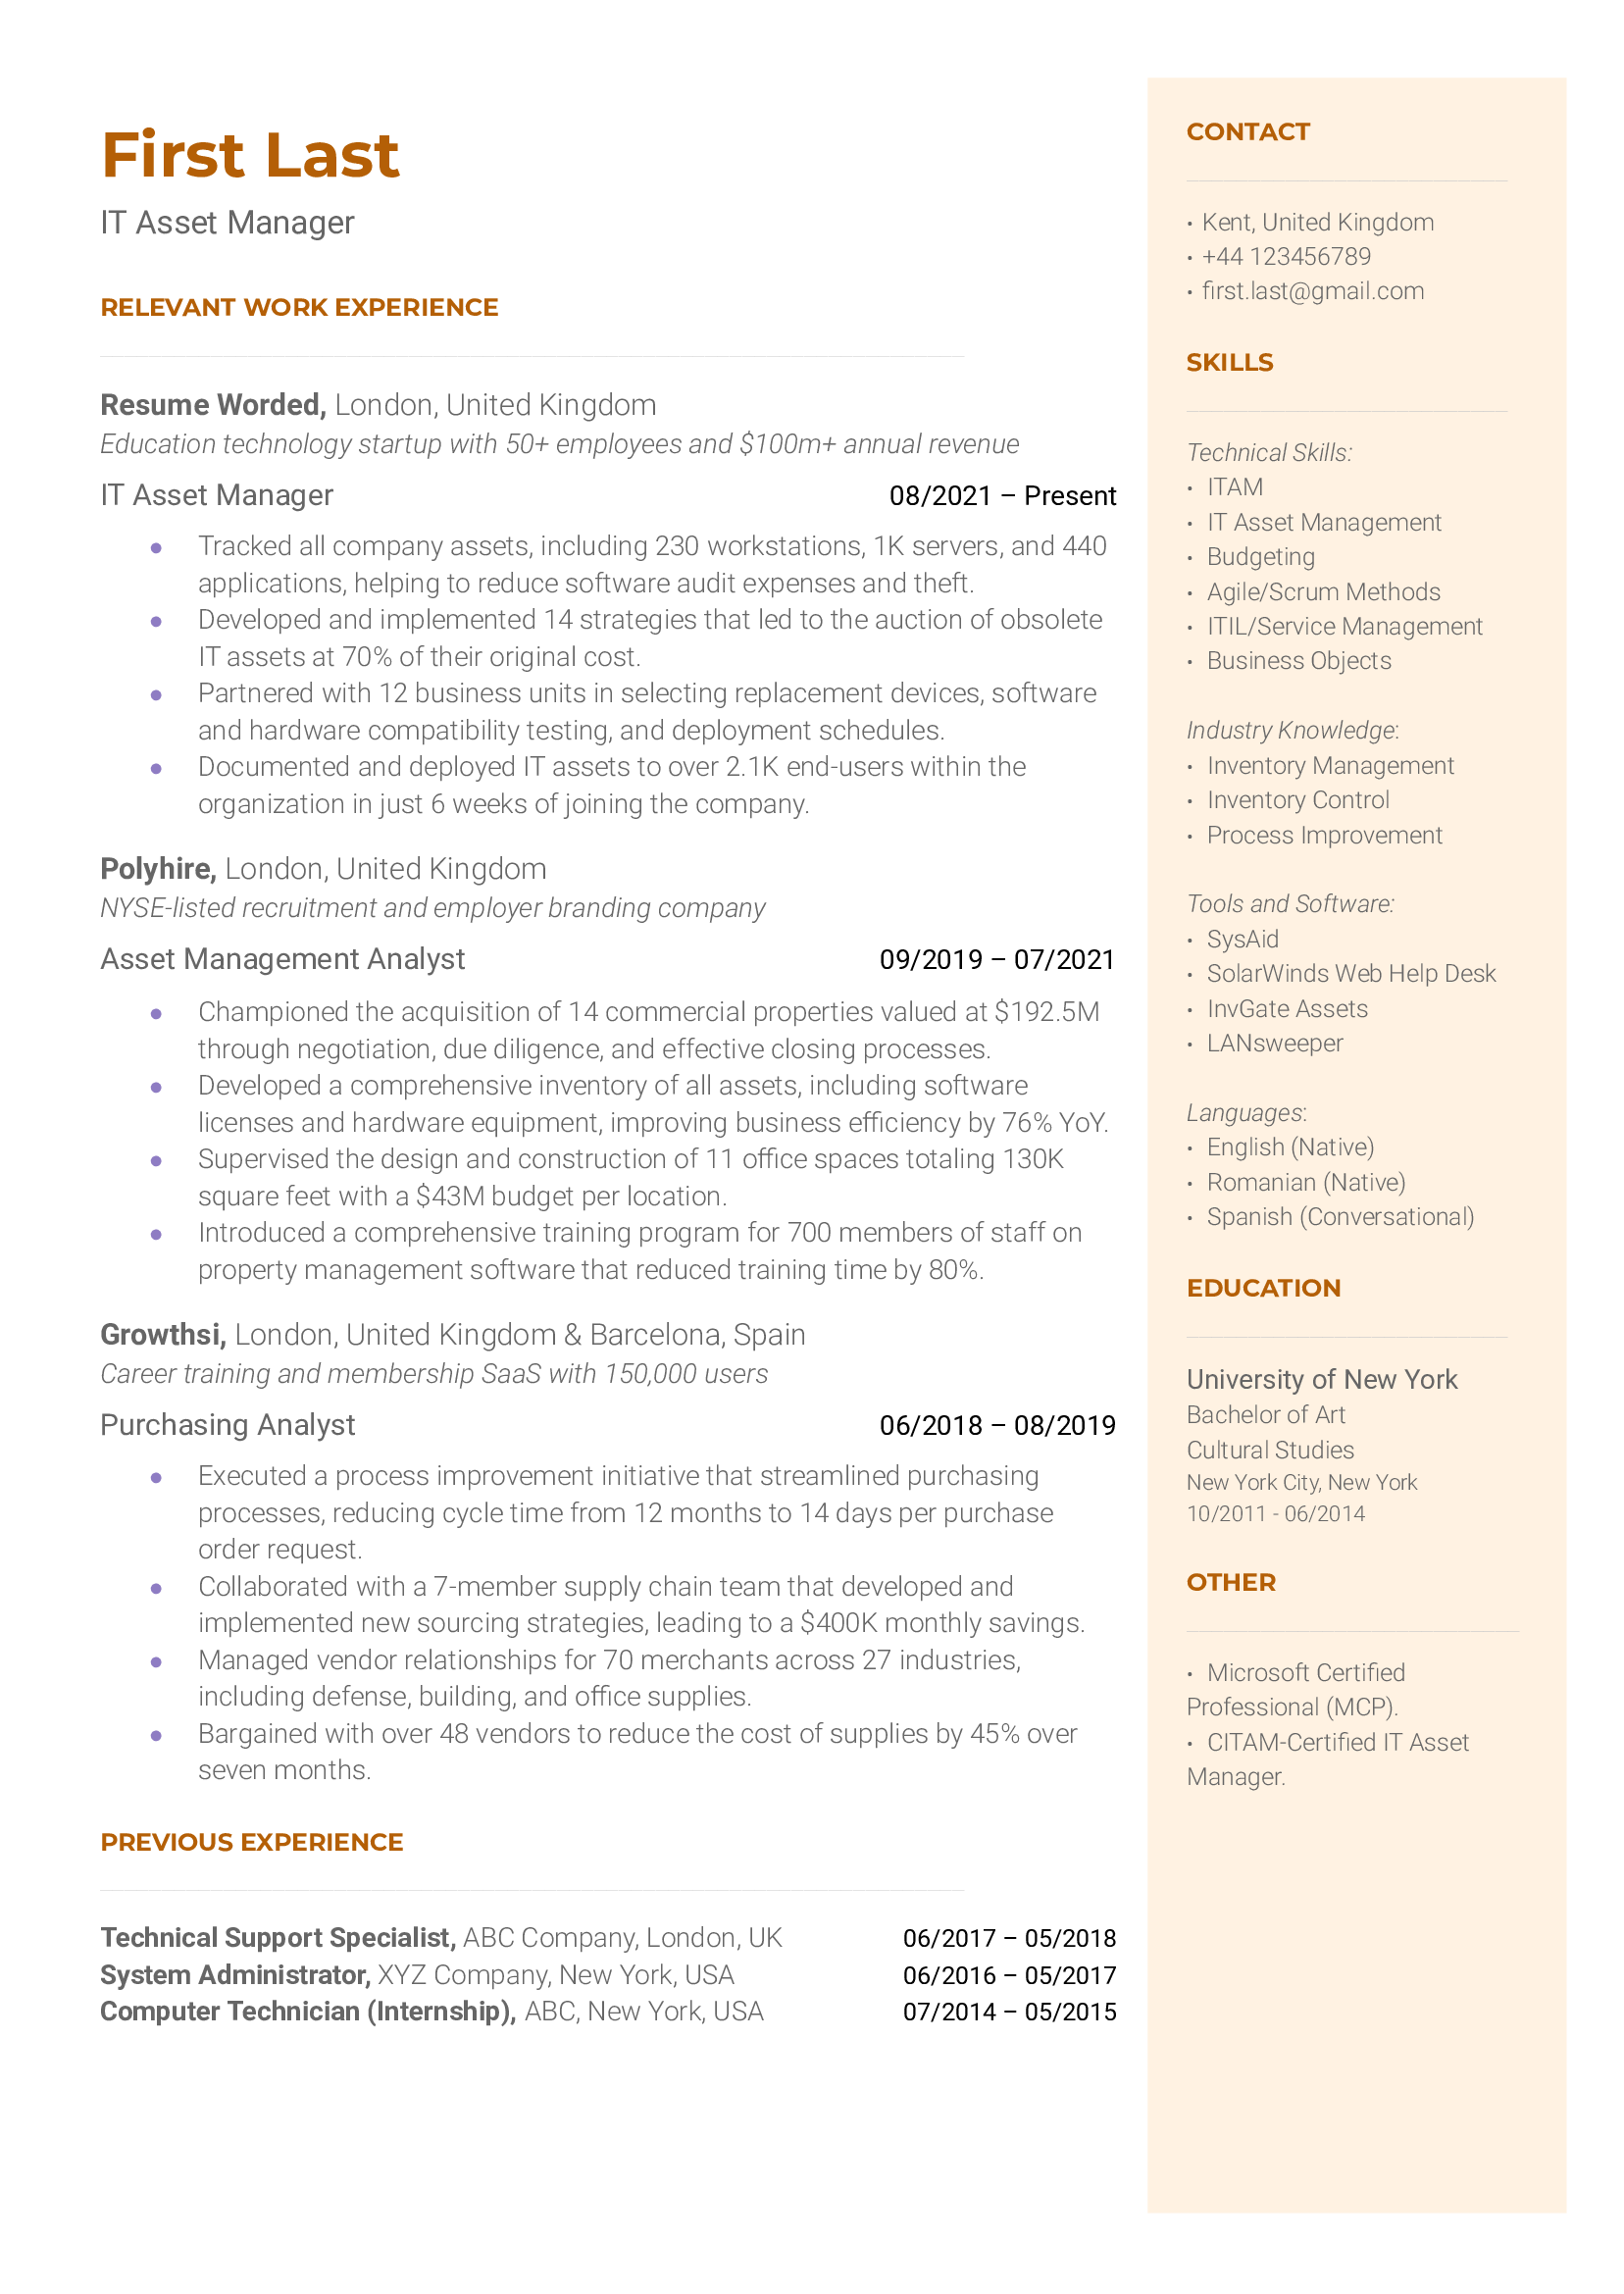 An IT asset manager resume sample that highlights the applicant’s wide skills range and relevant certifications.